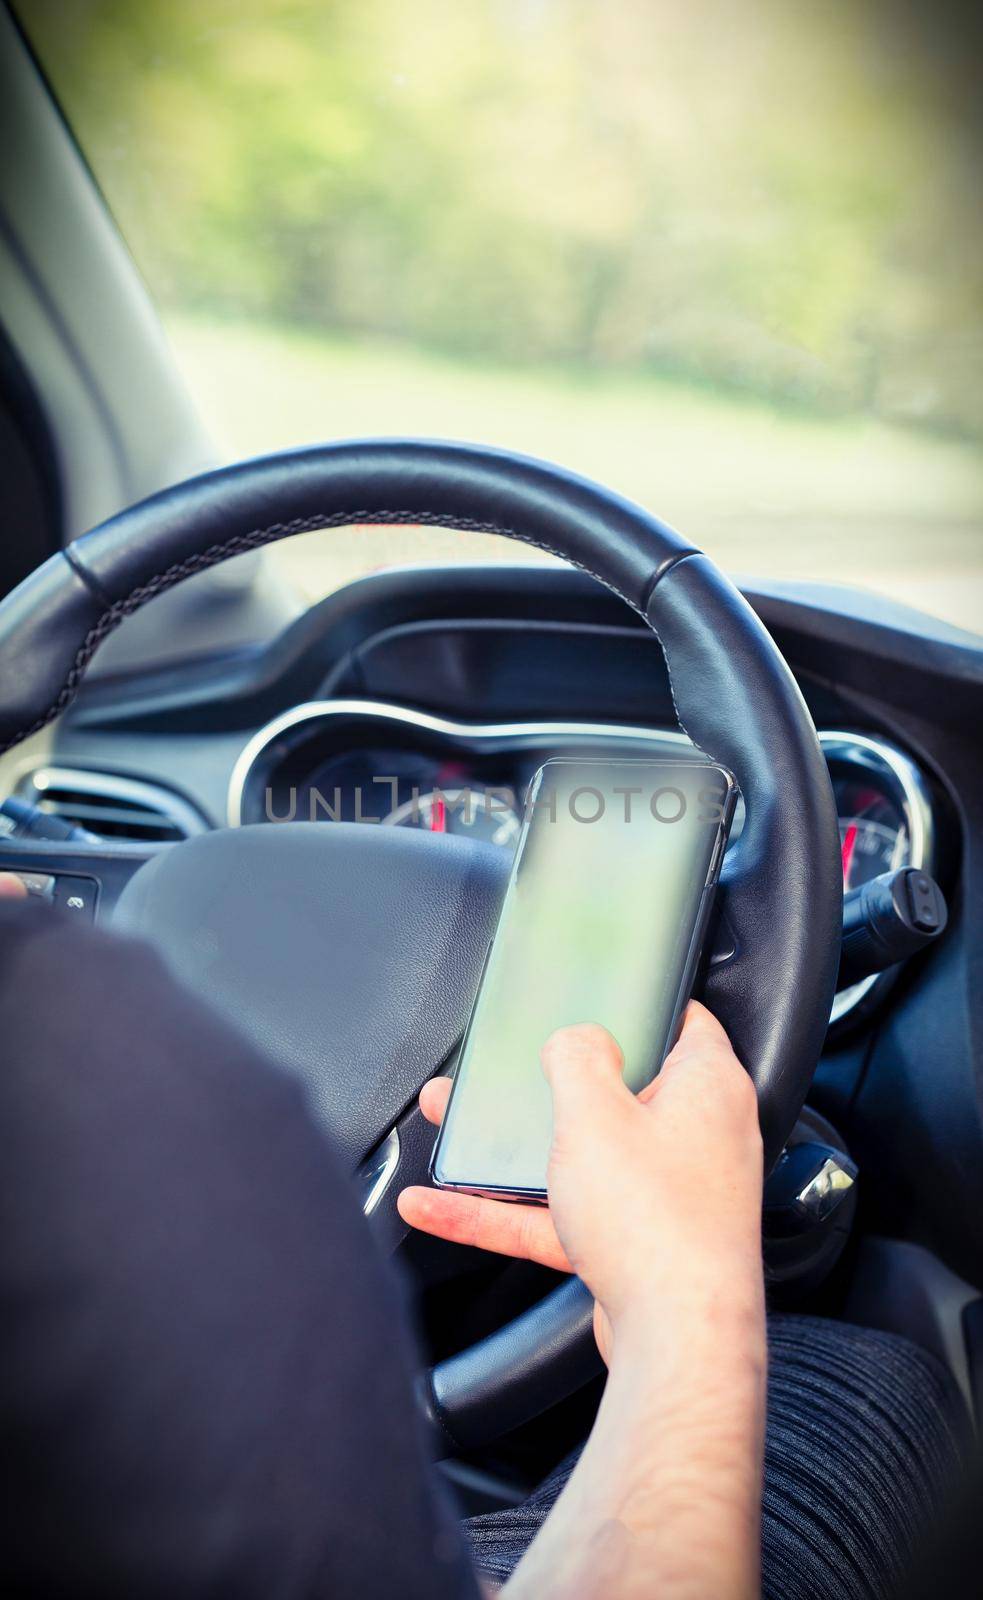 Young man driver using mobile phone in car, hand holding smart phone and driving and texting, transport business concept by Annebel146